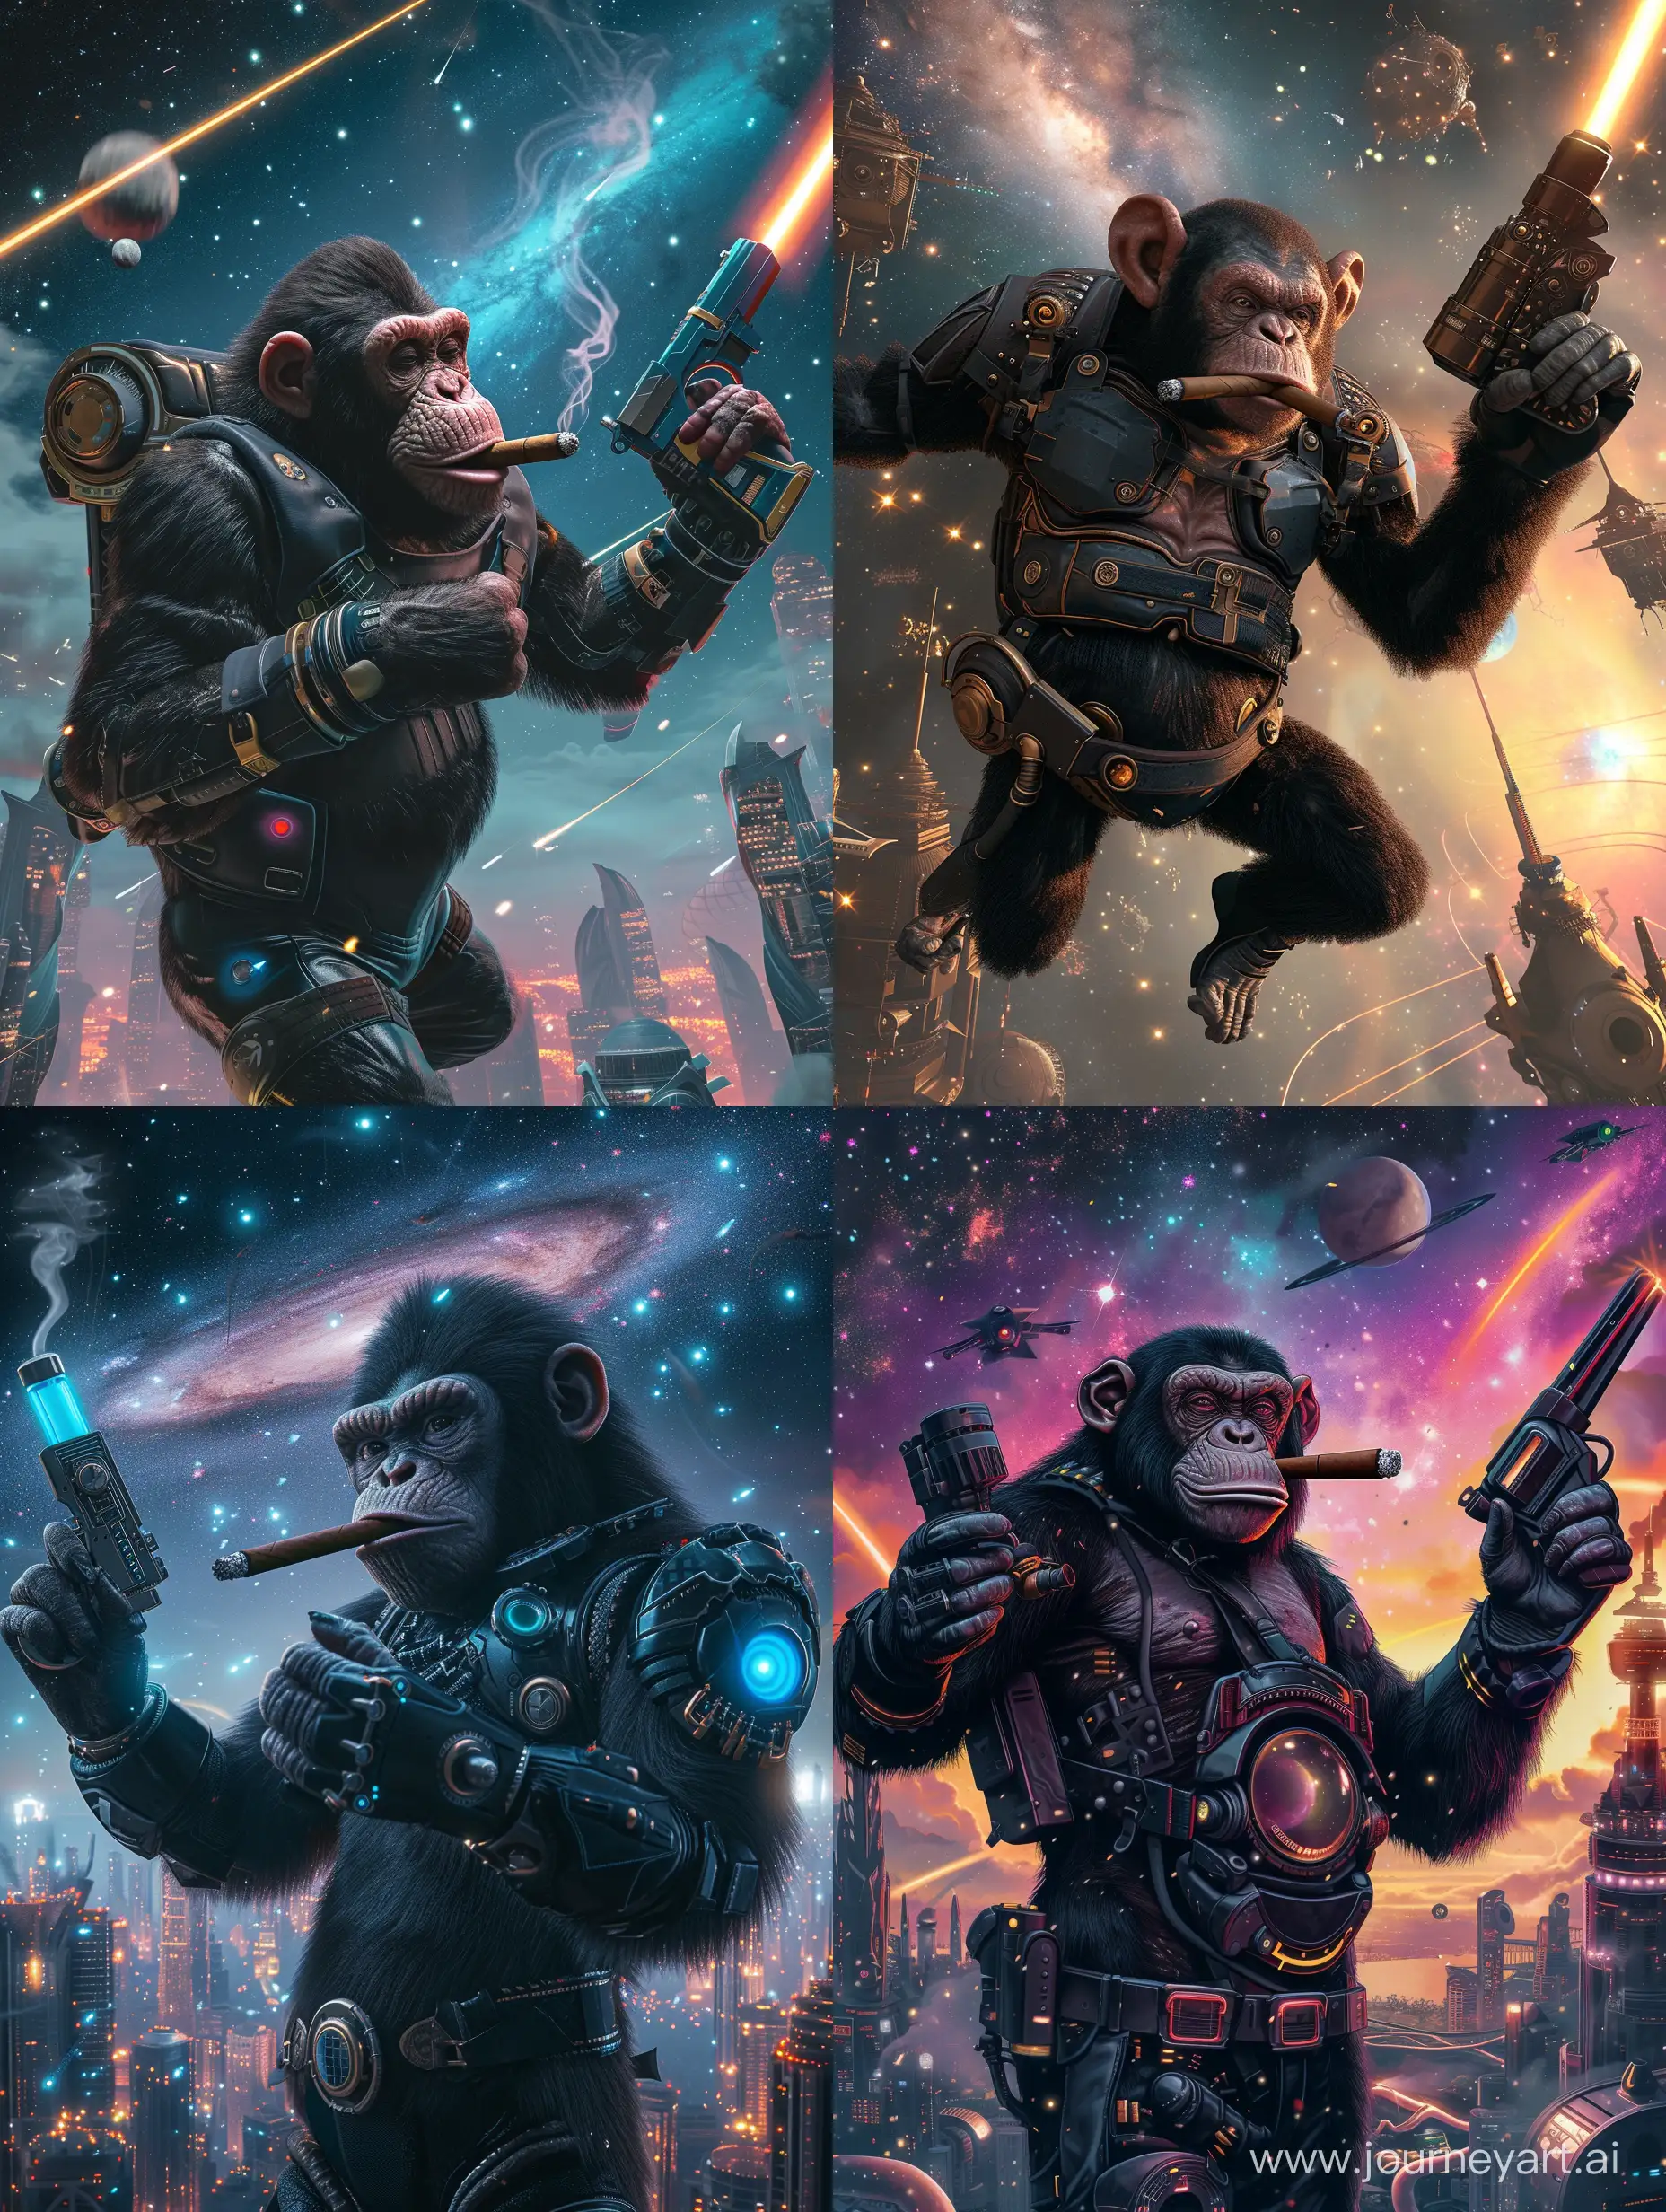 Floating steampunk ape smoking cigar holding futuristic laser gun in a cyberpunk themed space suit with space city stars and galaxy in background in high resolution